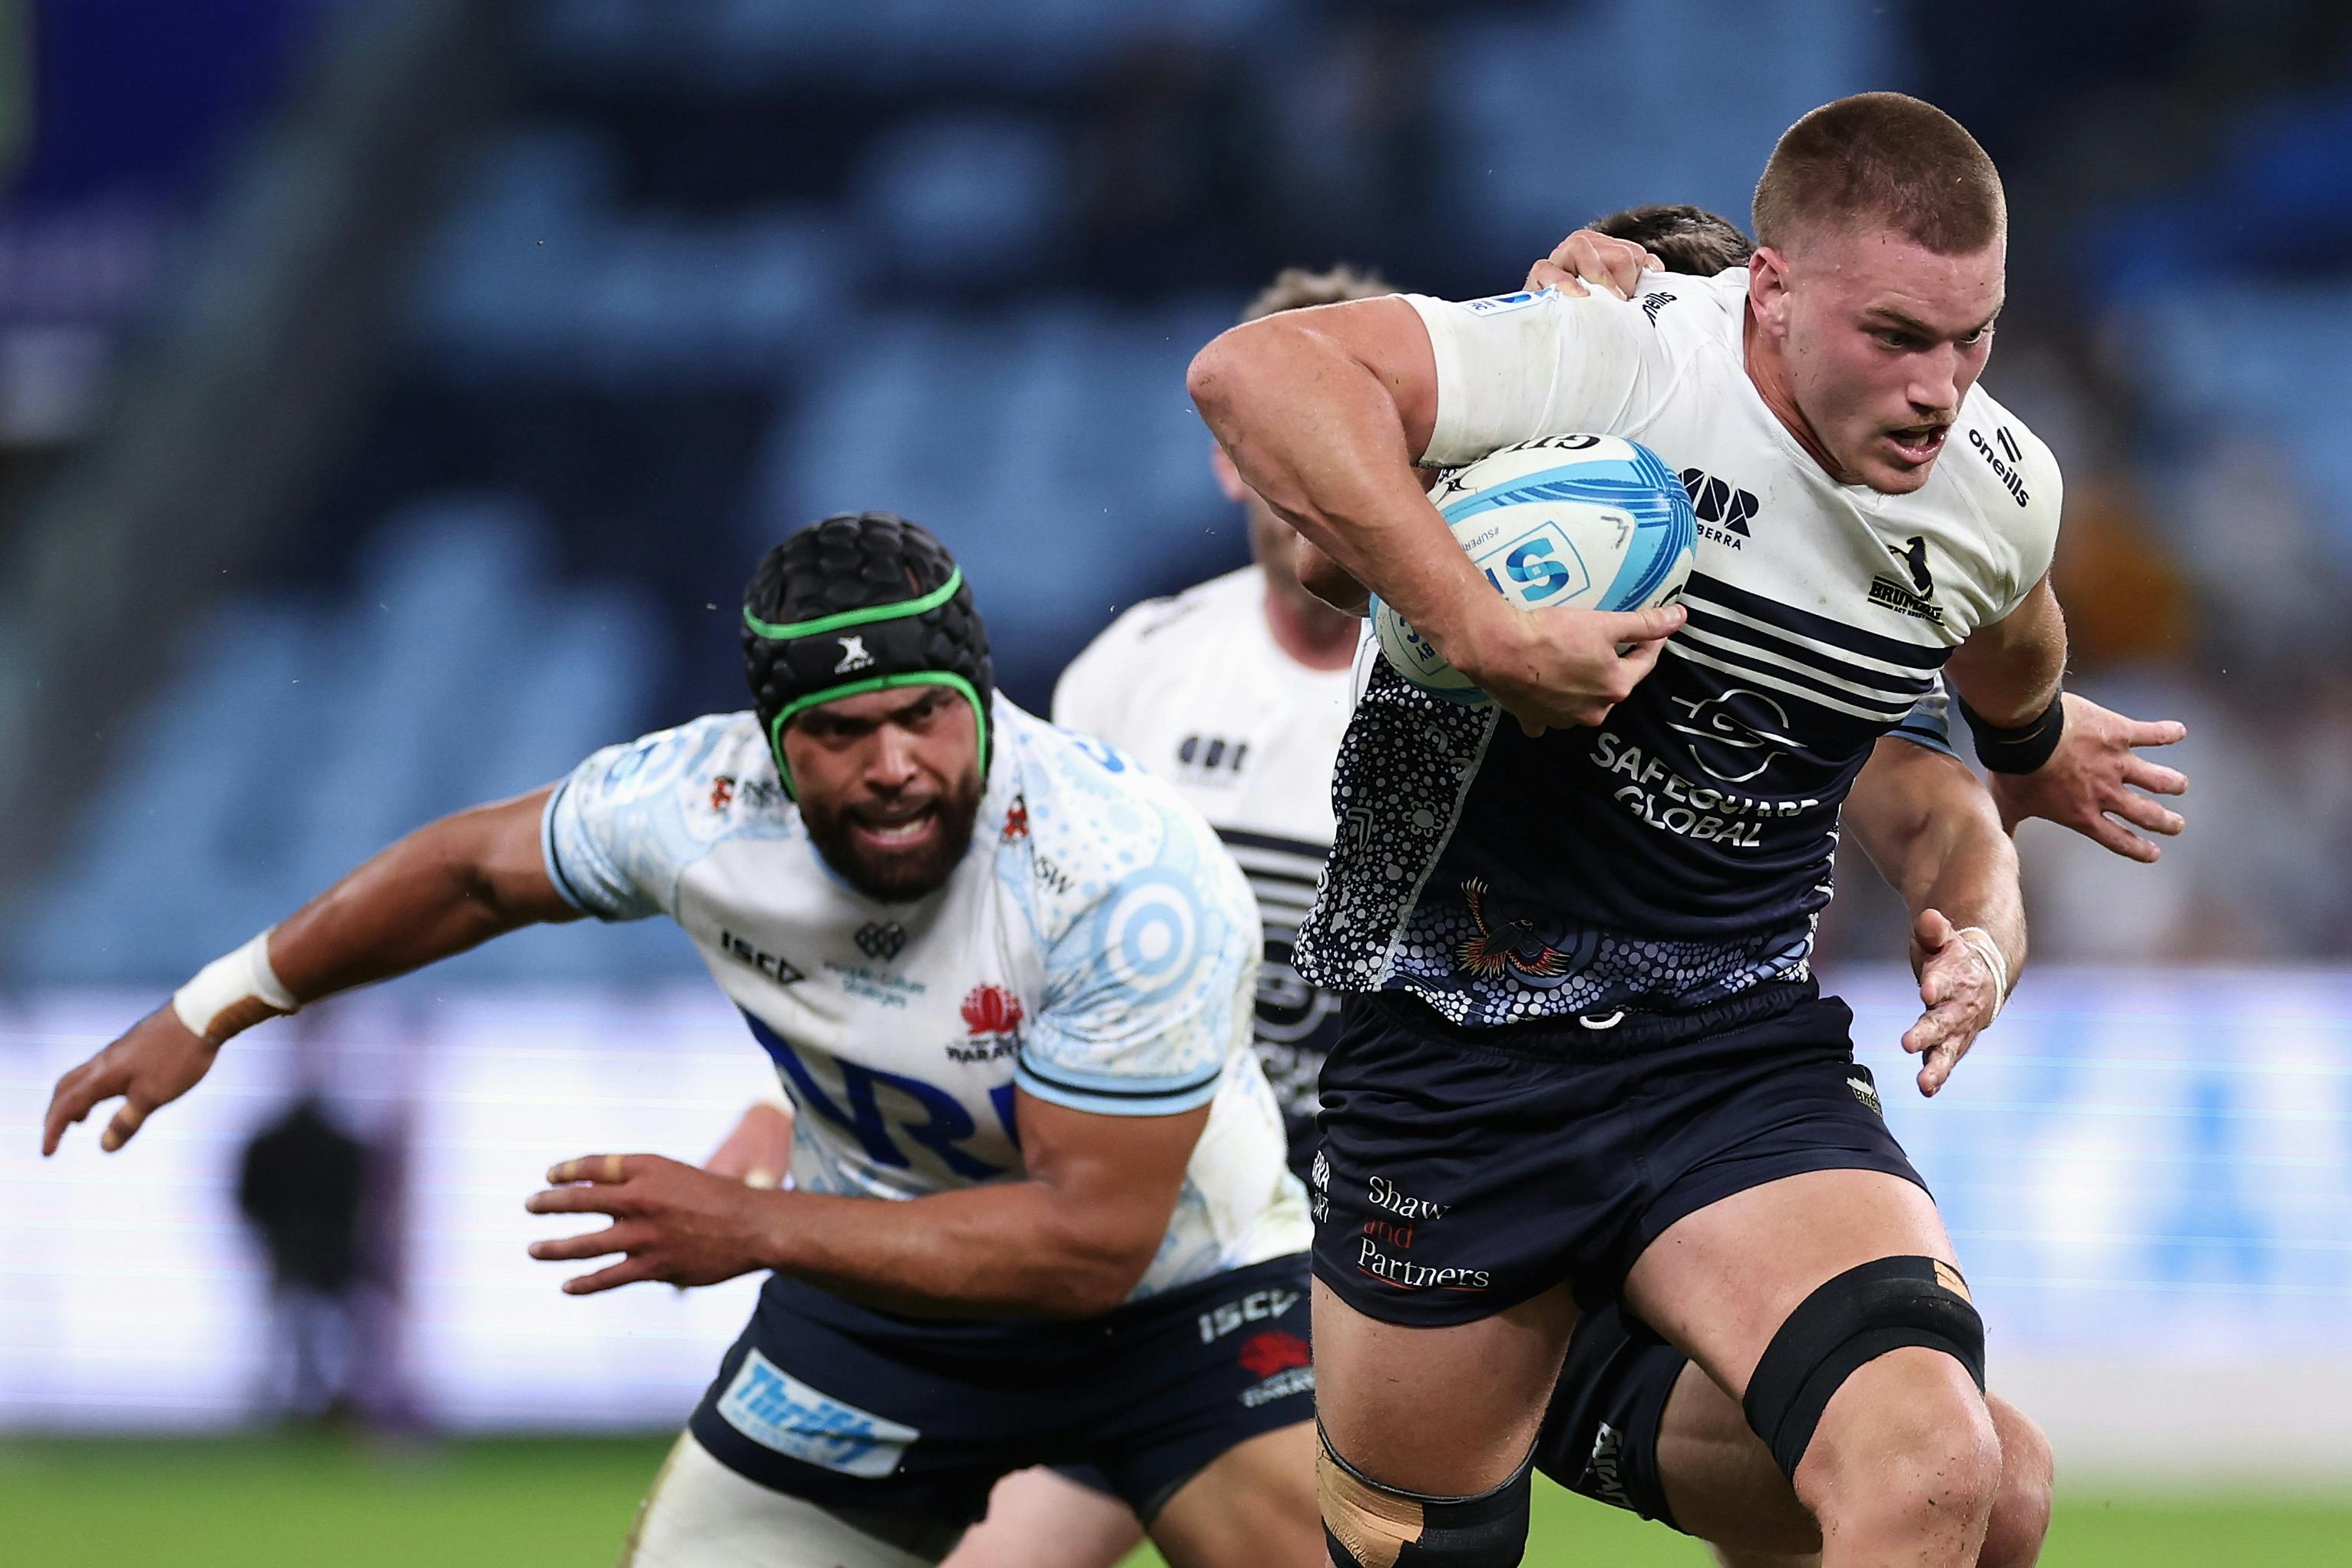 Charlie Cale of the ACT Brumbies has been named in the Wallabies Squad to take on Wales.